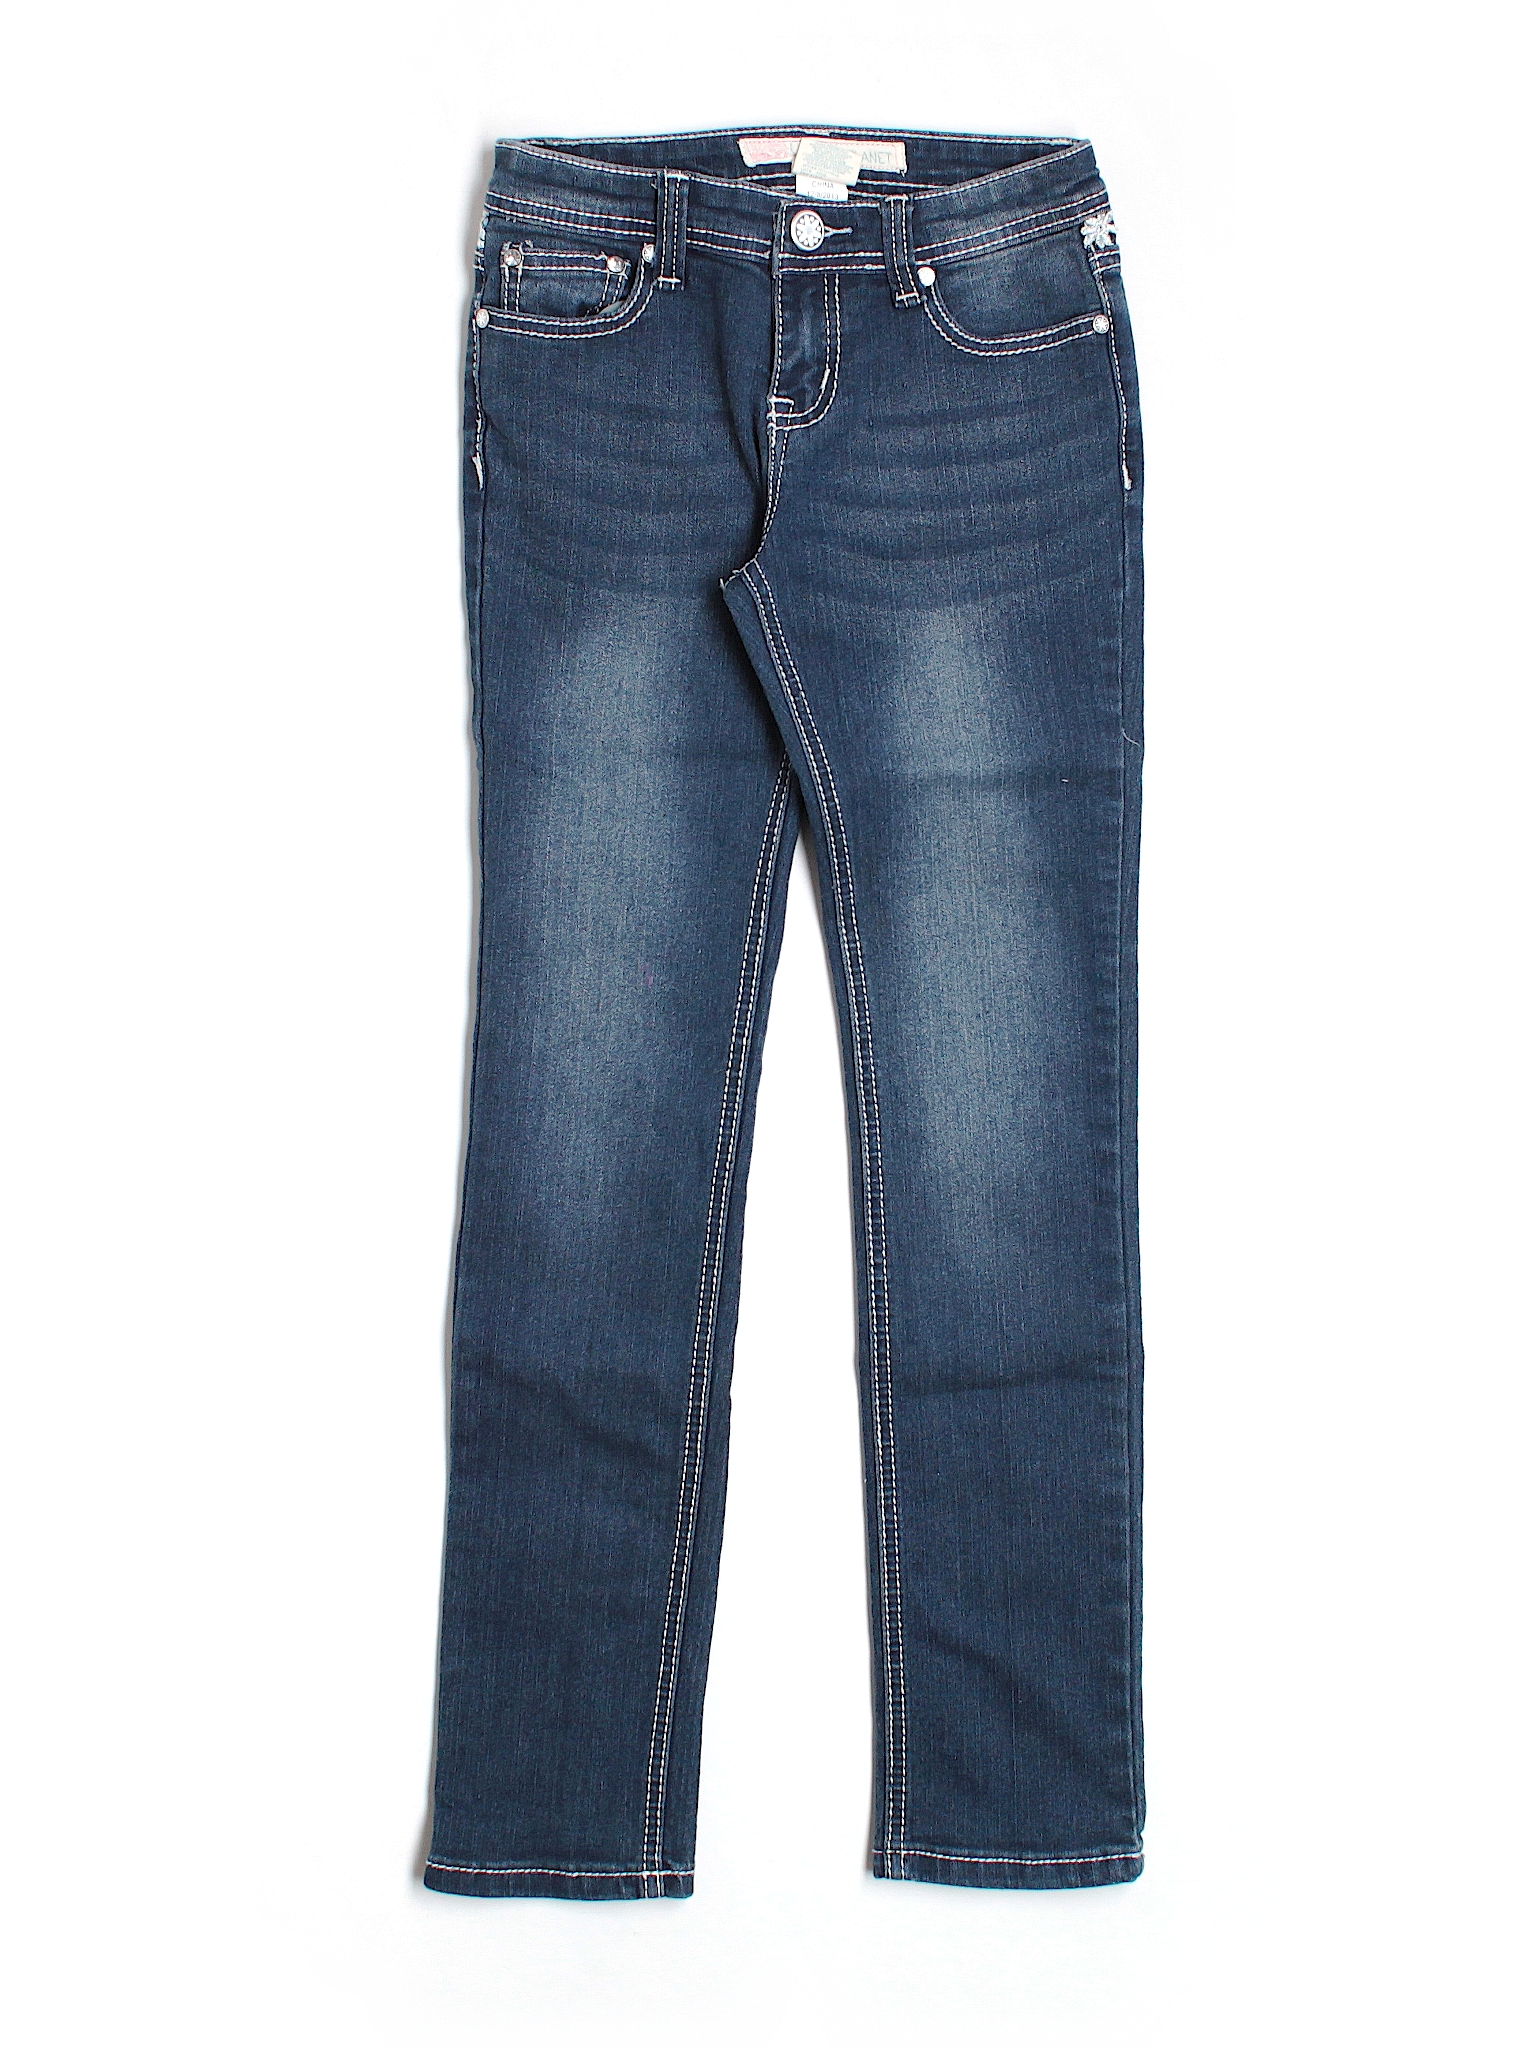 Free Planet Blue Jeans Size 10 - 66% off | thredUP